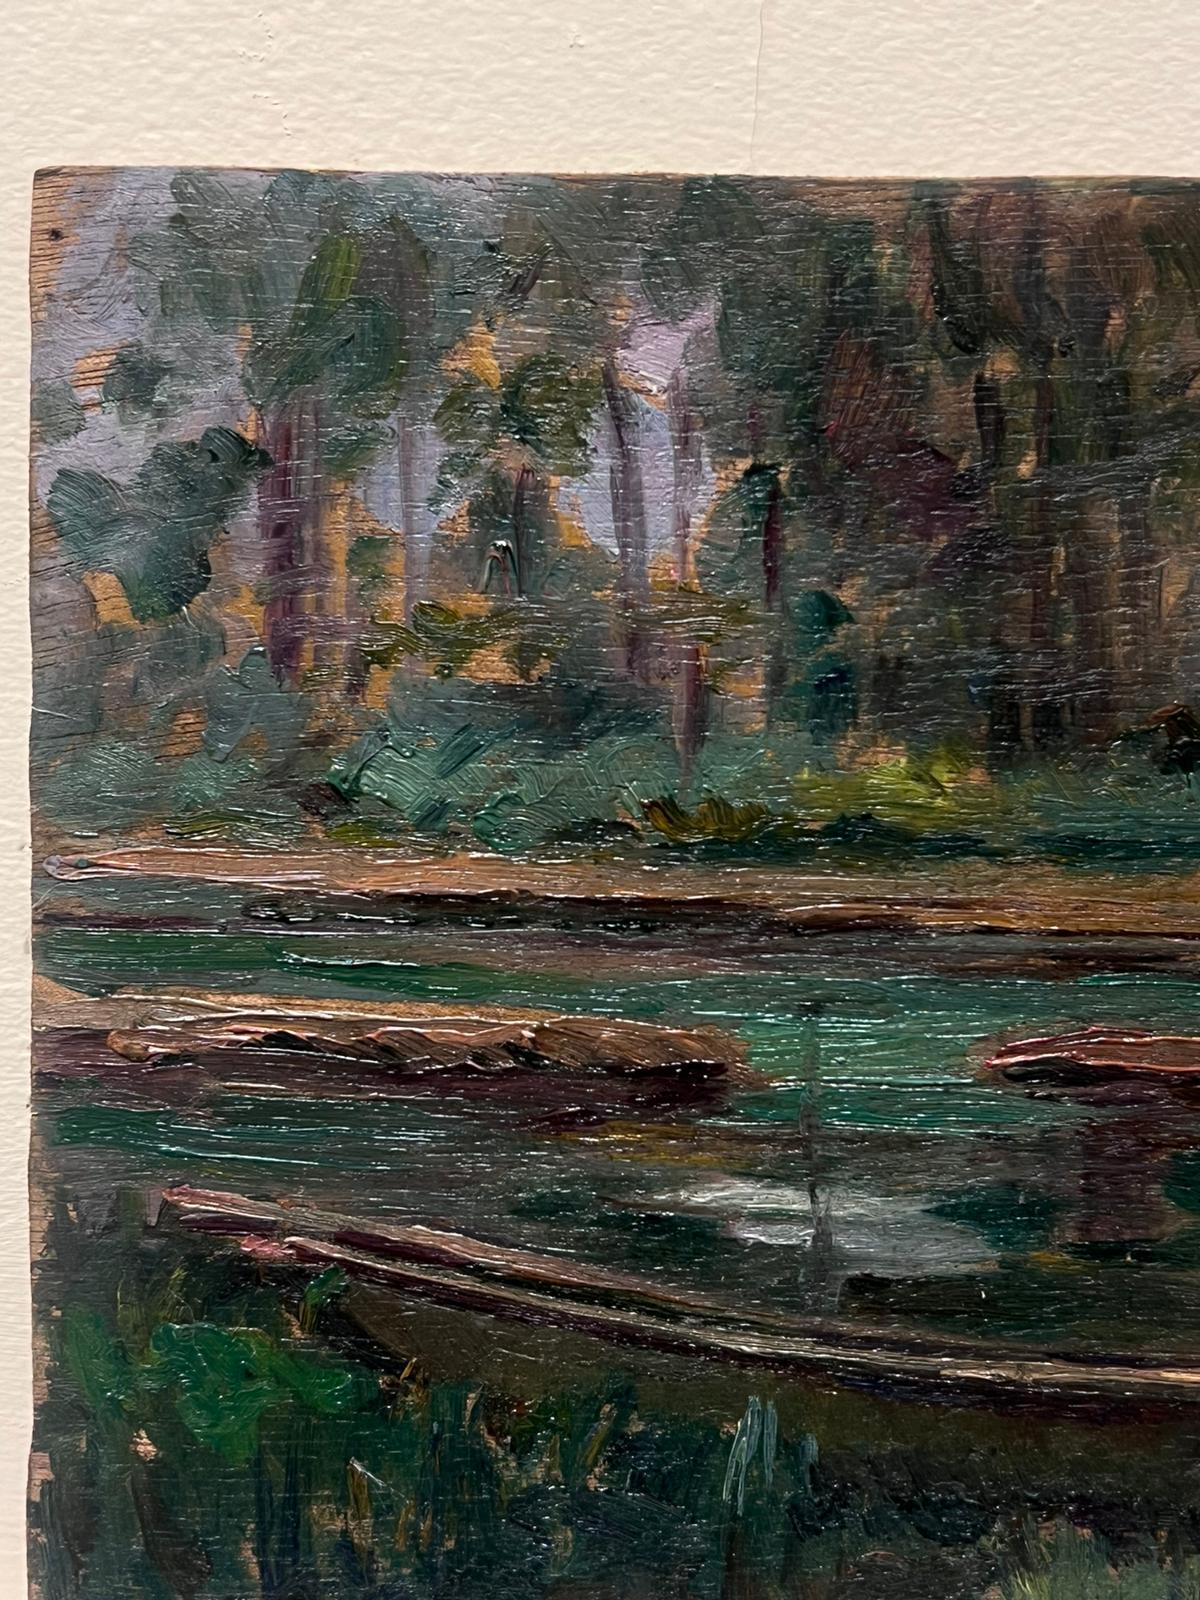 French Landscape
by Louise Alix (French, 1888-1980) *see notes below
provenance stamp to the back 
oil painting on board, unframed
measures: 7.75 high by 9.5 inches wide
condition: overall very good and sound, a few scuffs and marks to the surface